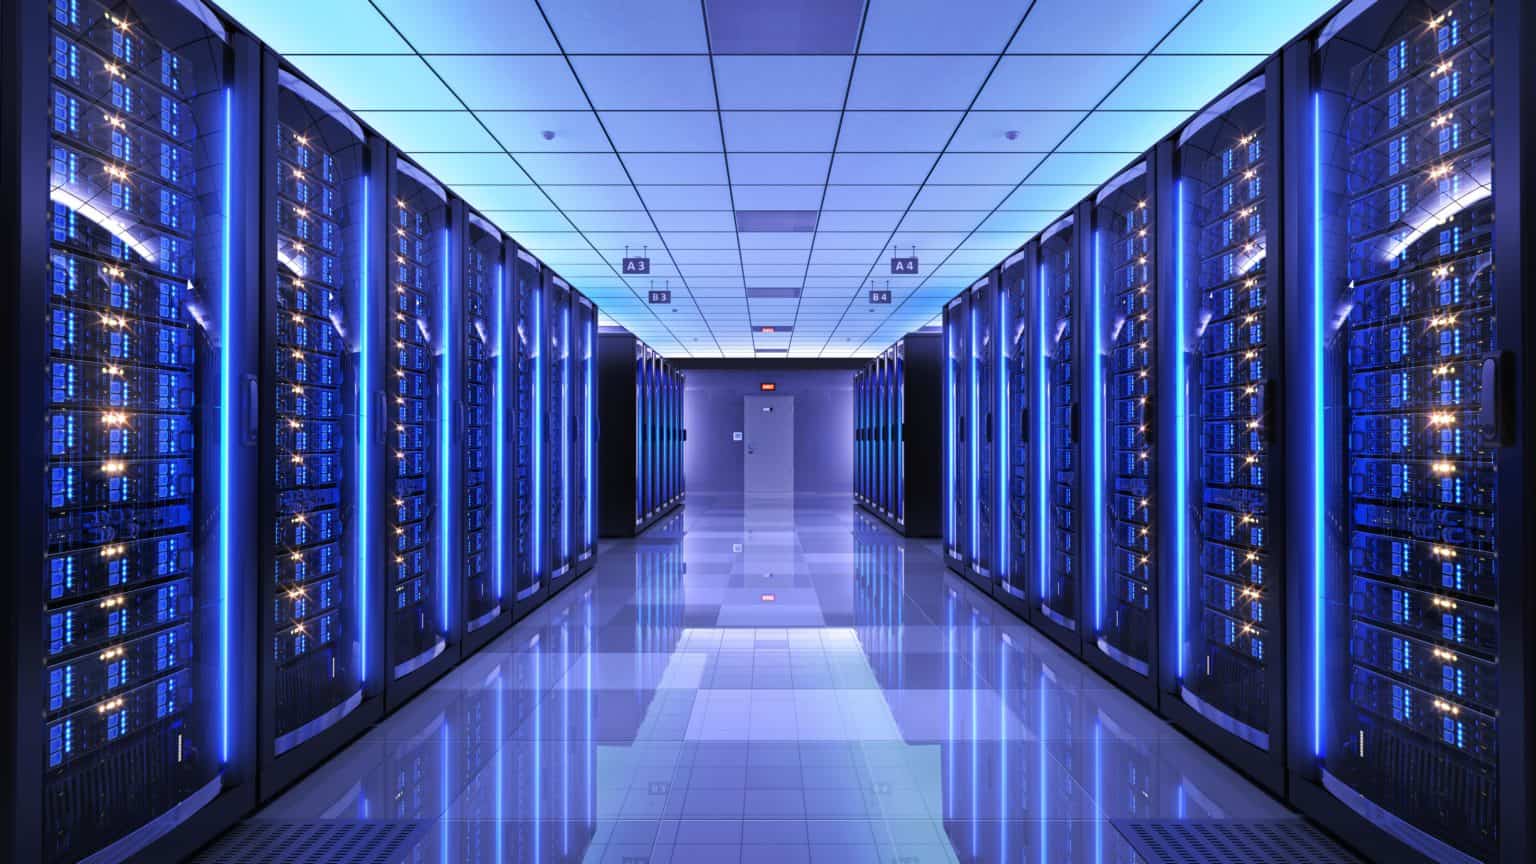 Global Data Center Construction Market Is Estimated To Witness High Growth Owing To Increasing Demand for Cloud Computing